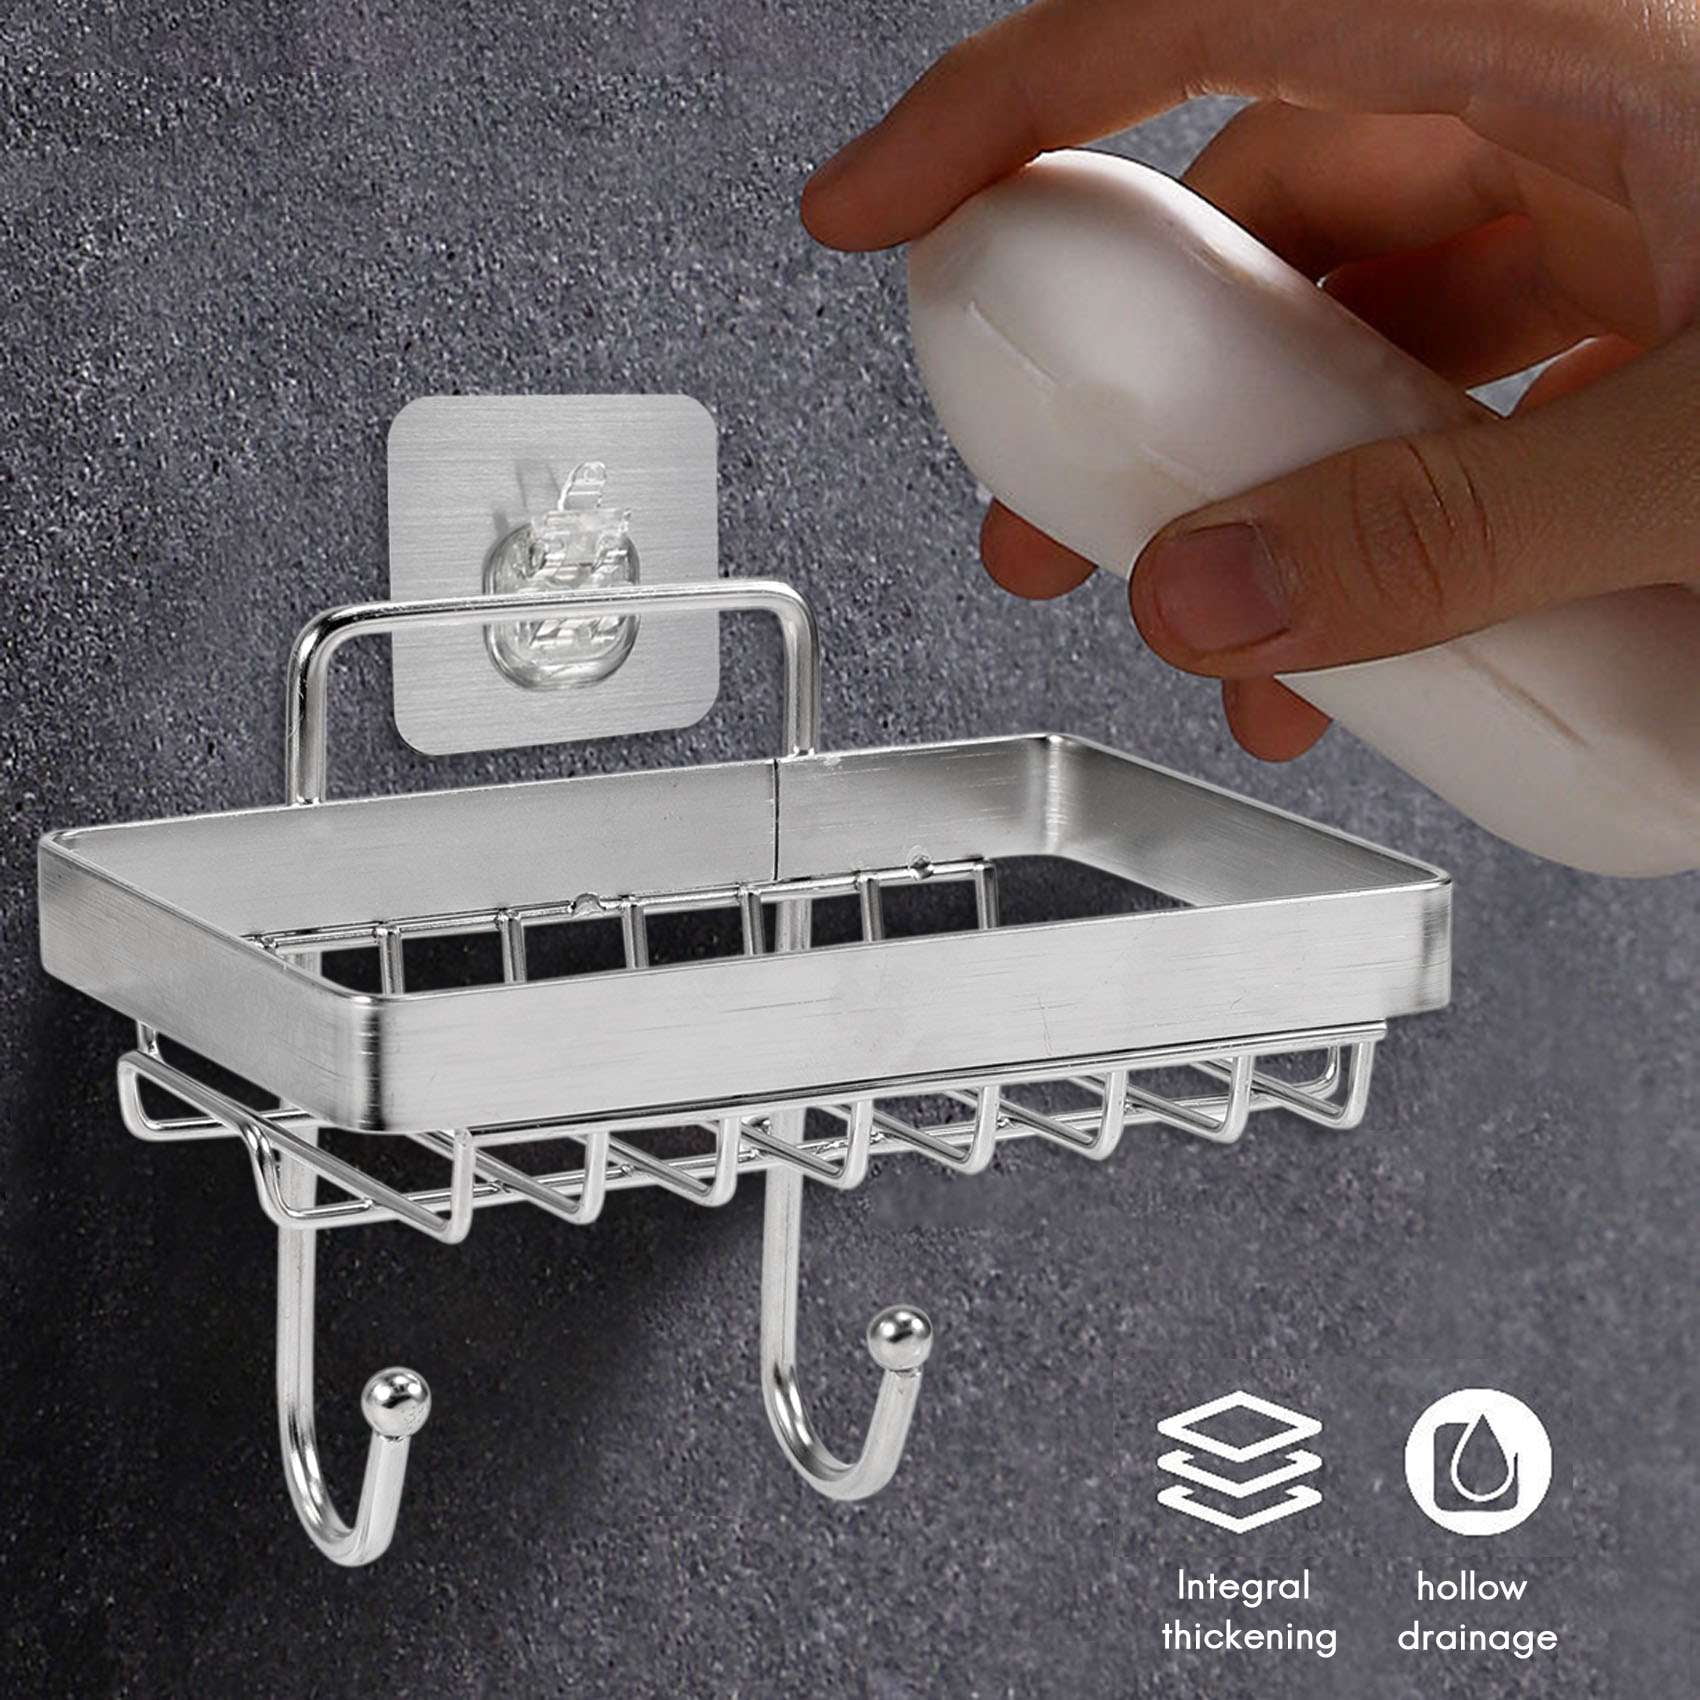 TSV Double Tier Soap Dish, Stainless Steel Soap Holder with Hooks, Non-Trace Adhesive No Drilling, Wall-Mounted Bar Soap Sponge Holder for Shower